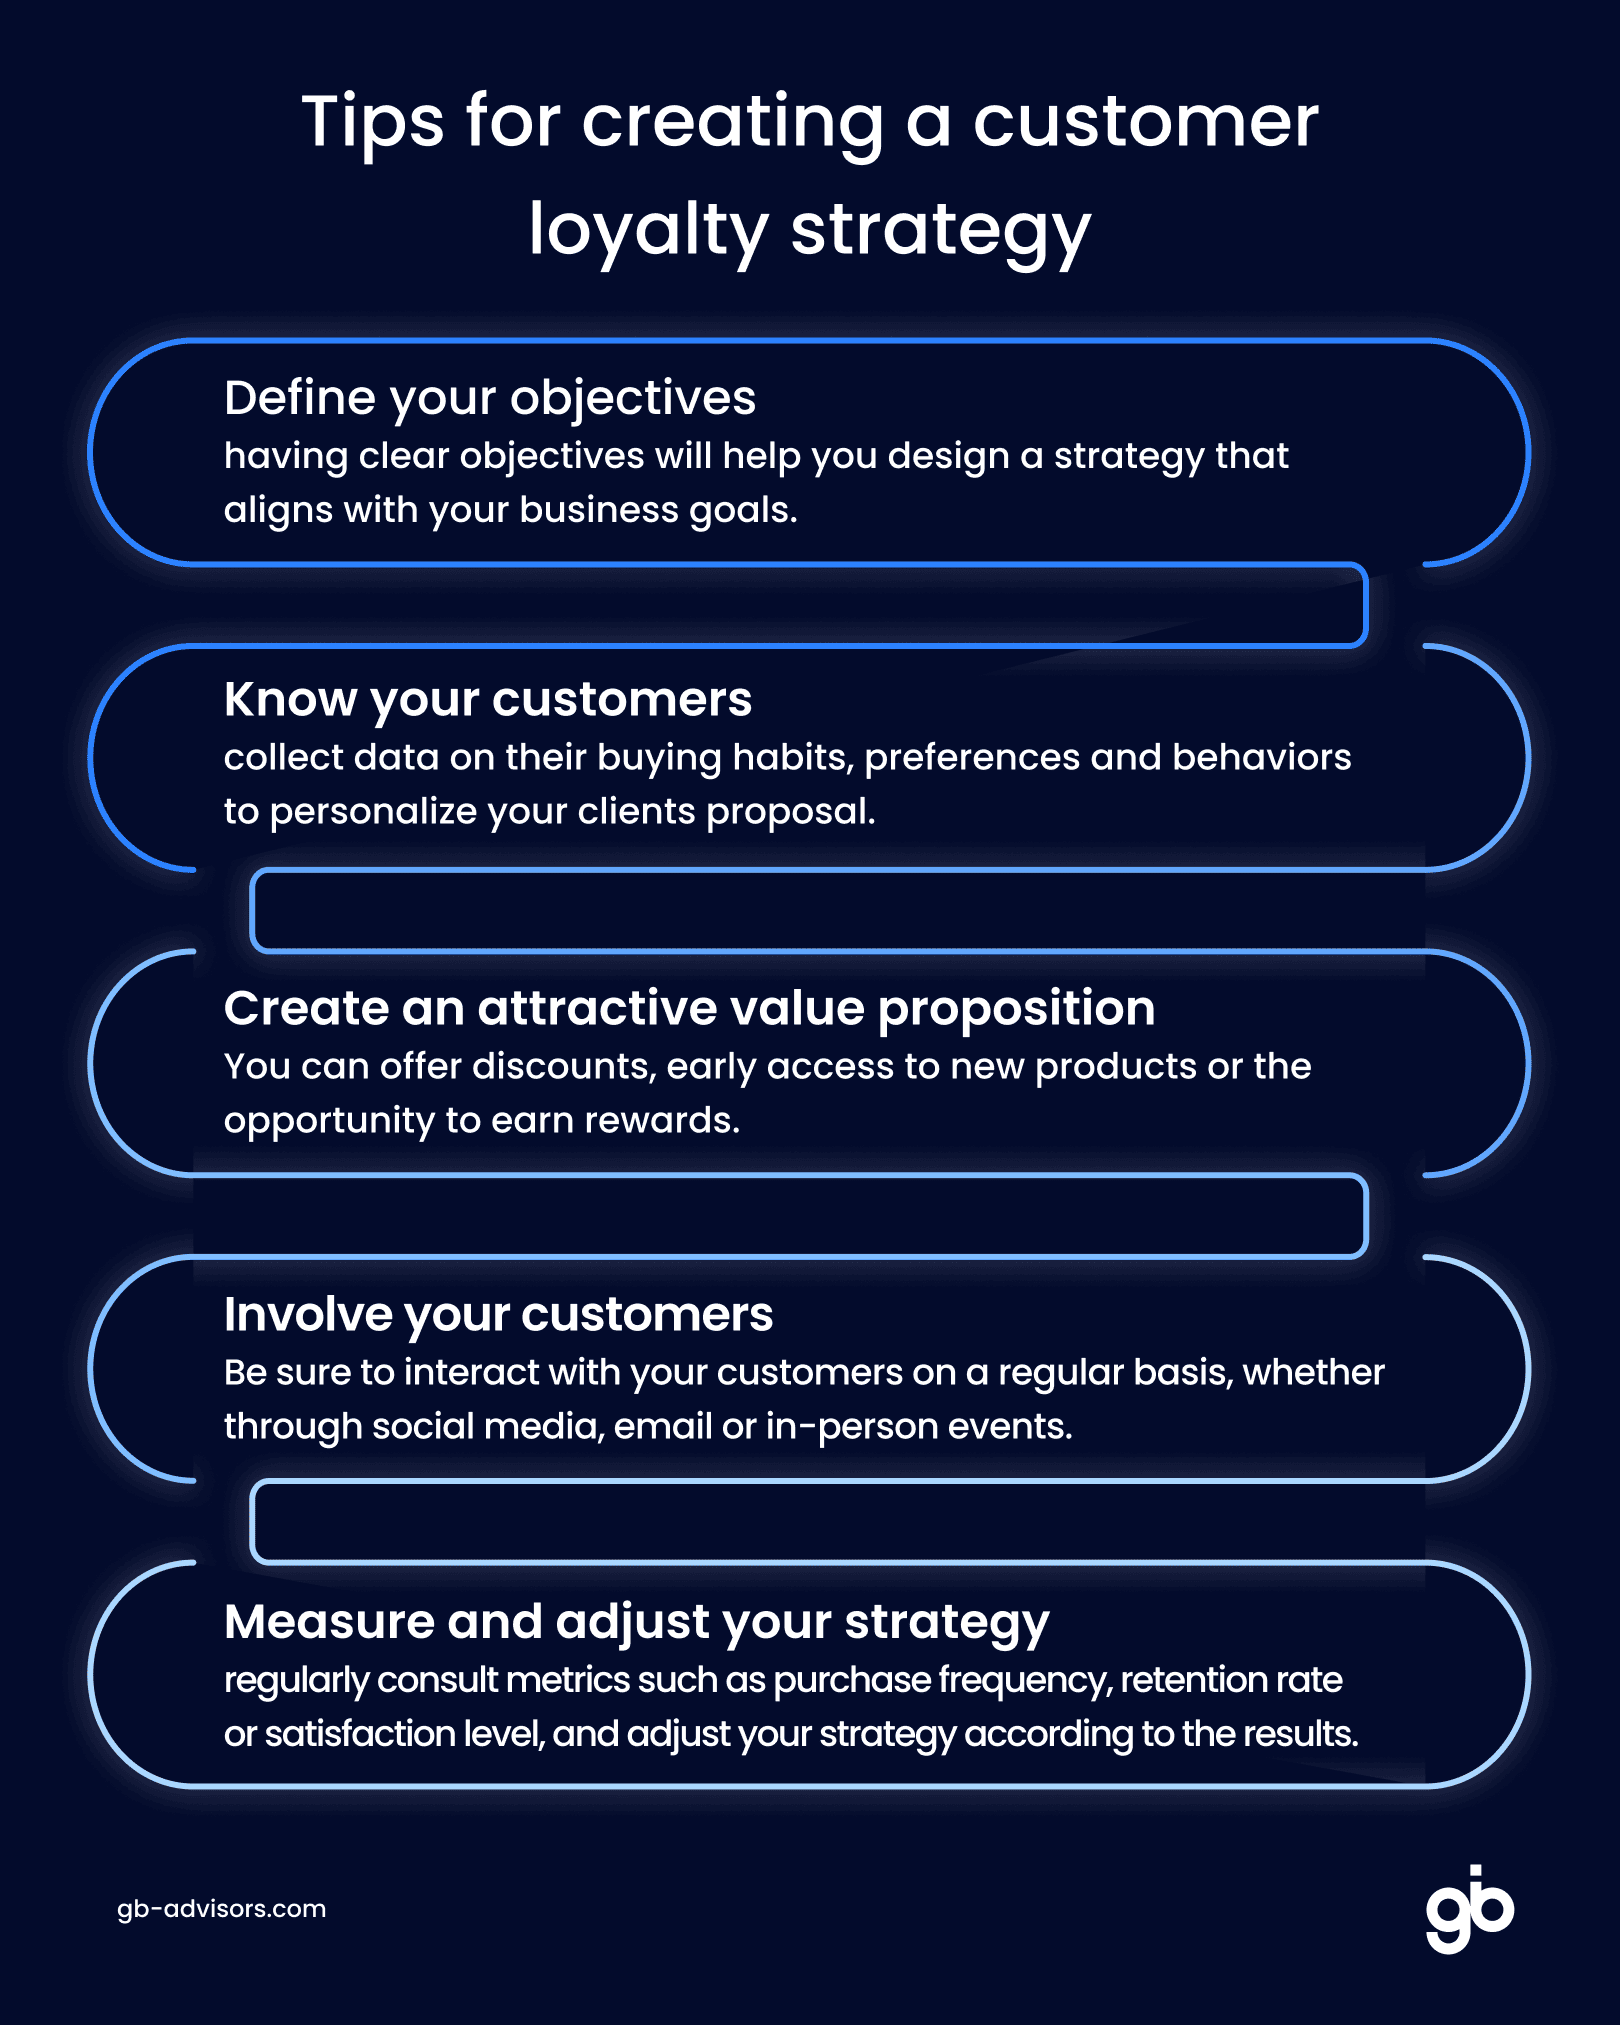 Tips for creating a customer loyalty strategy